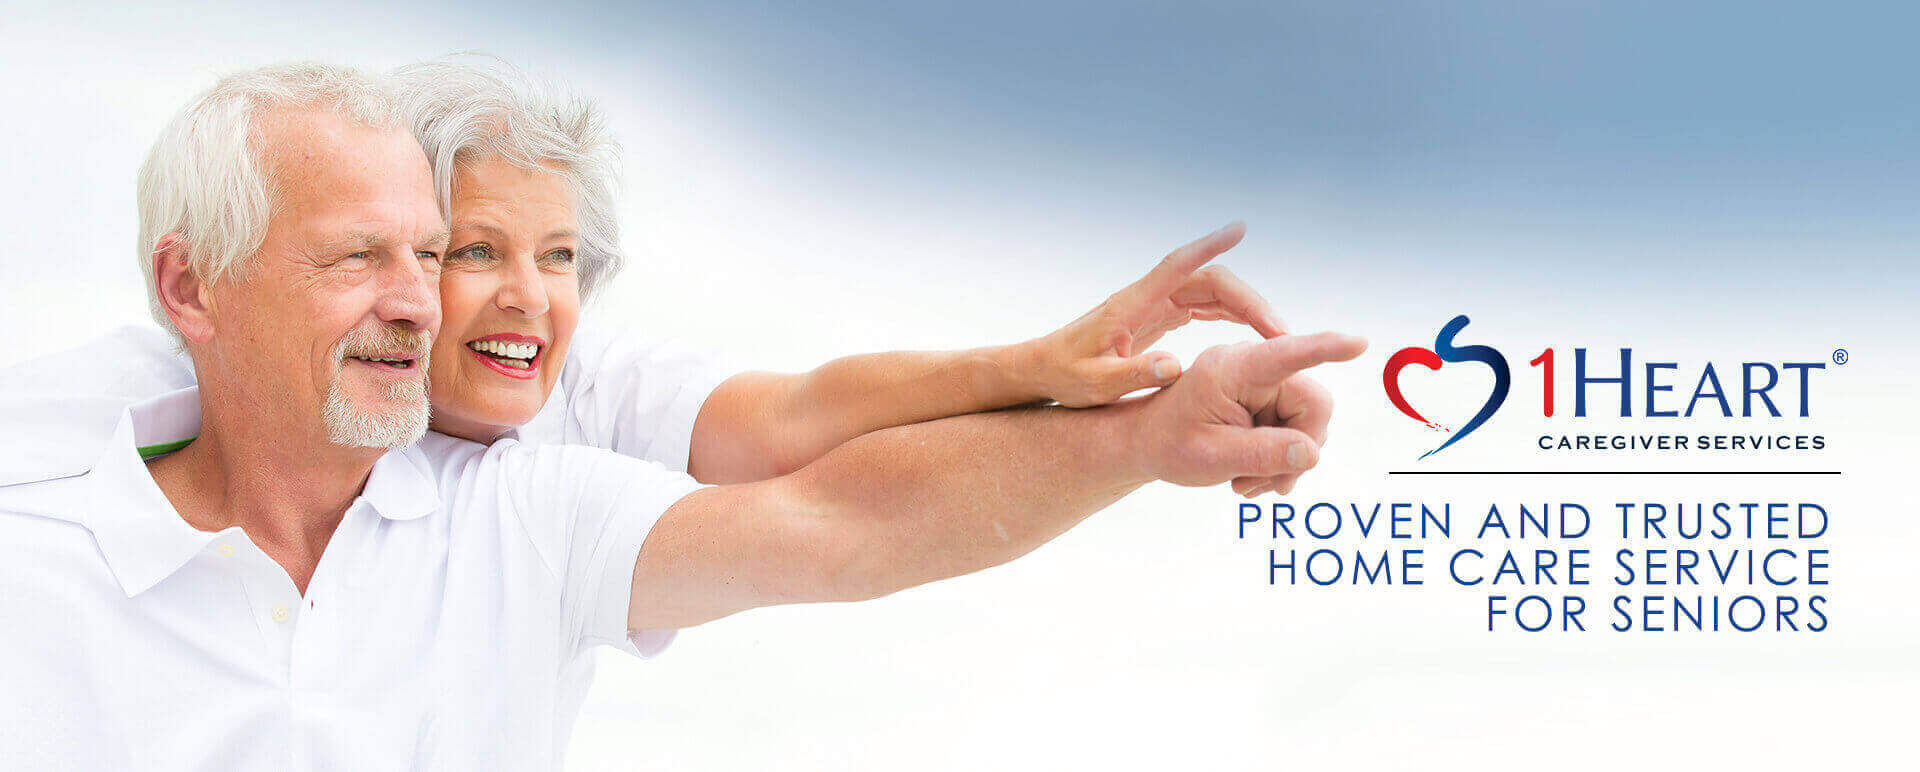 Two seniors in white pointing with 1 Heart Caregiver Services logo 'Proven and Trusted Home Care Services For Seniors'